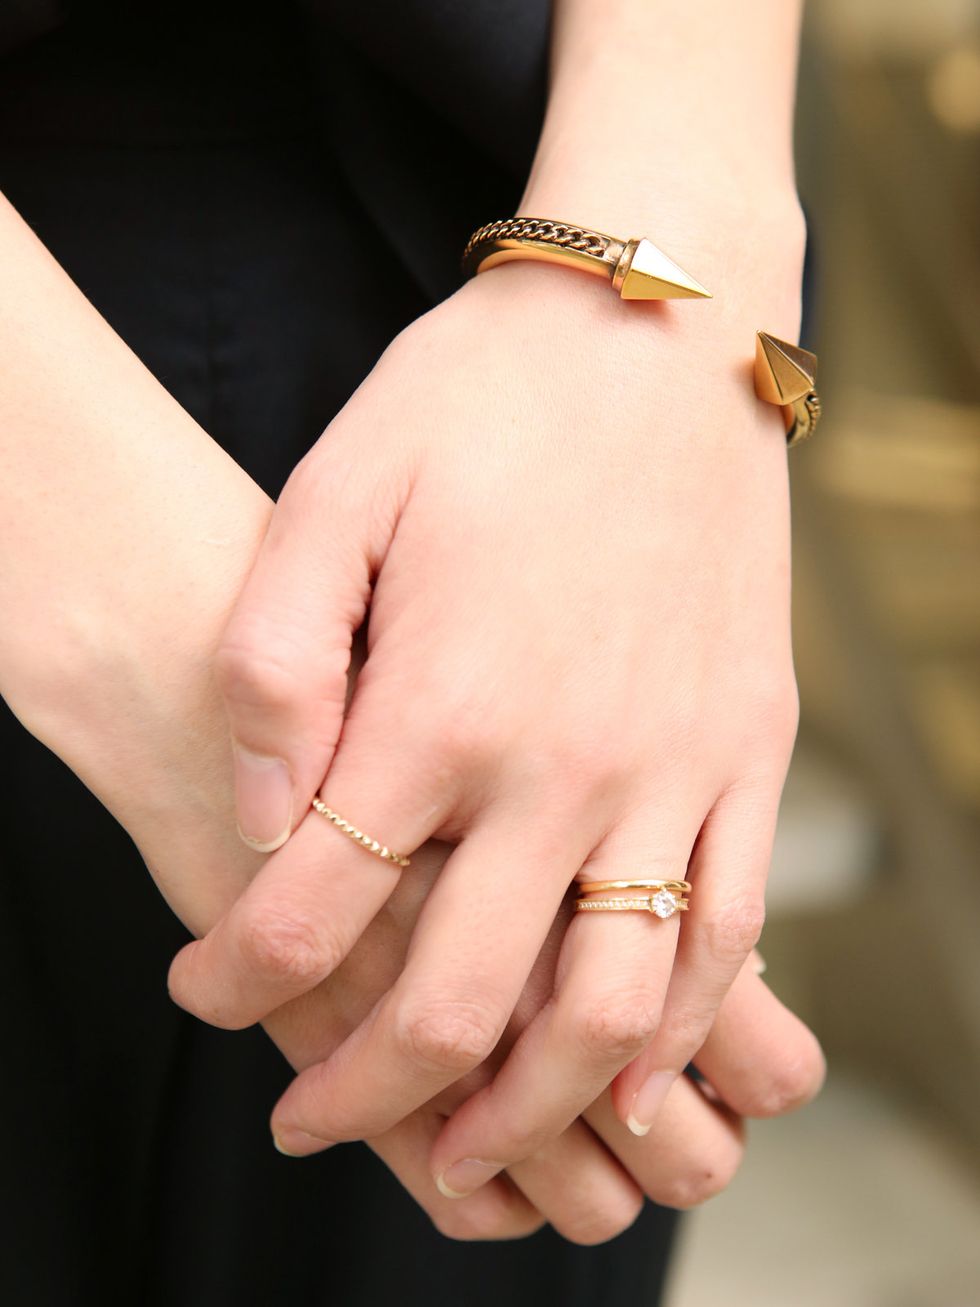 Finger, Hand, Ring, Jewellery, Fashion accessory, Wrist, Nail, Interaction, Holding hands, Gesture, 